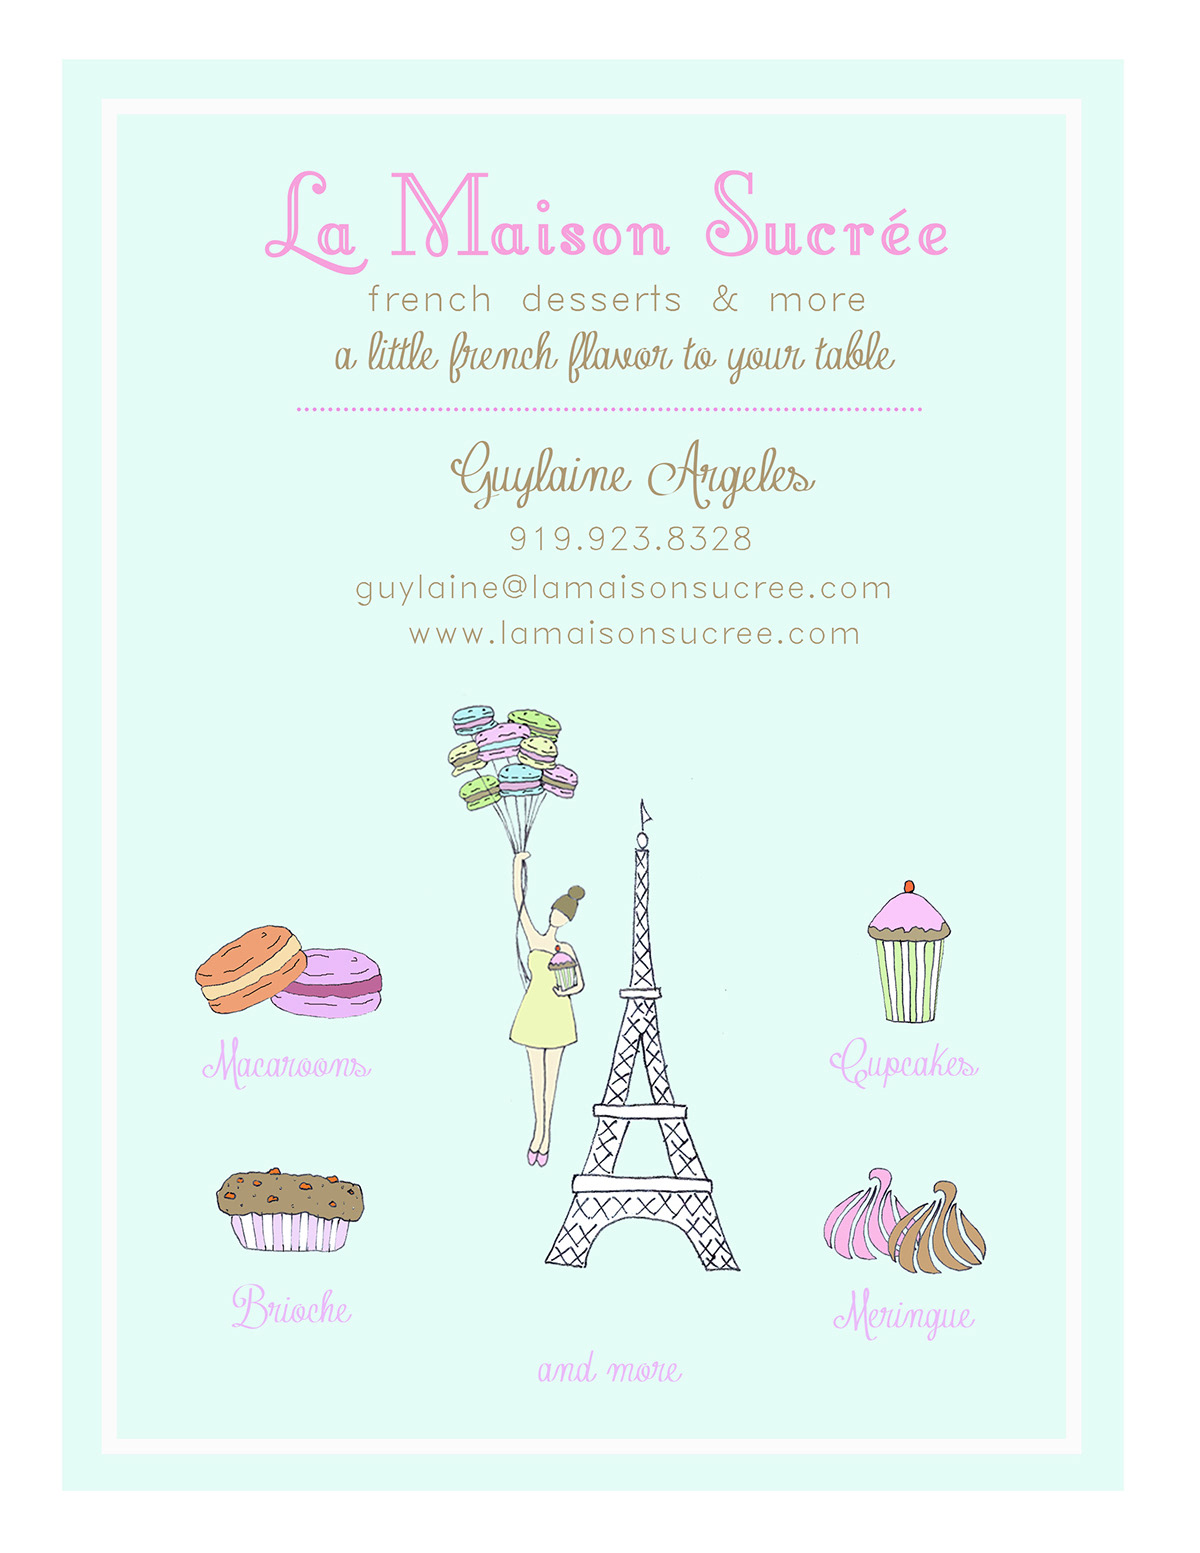 brand Computer photoshop promo promoposter French frenchpastries advertisement Promotion pastries macaroon brioche Meringue cupcake lamaisonsucree